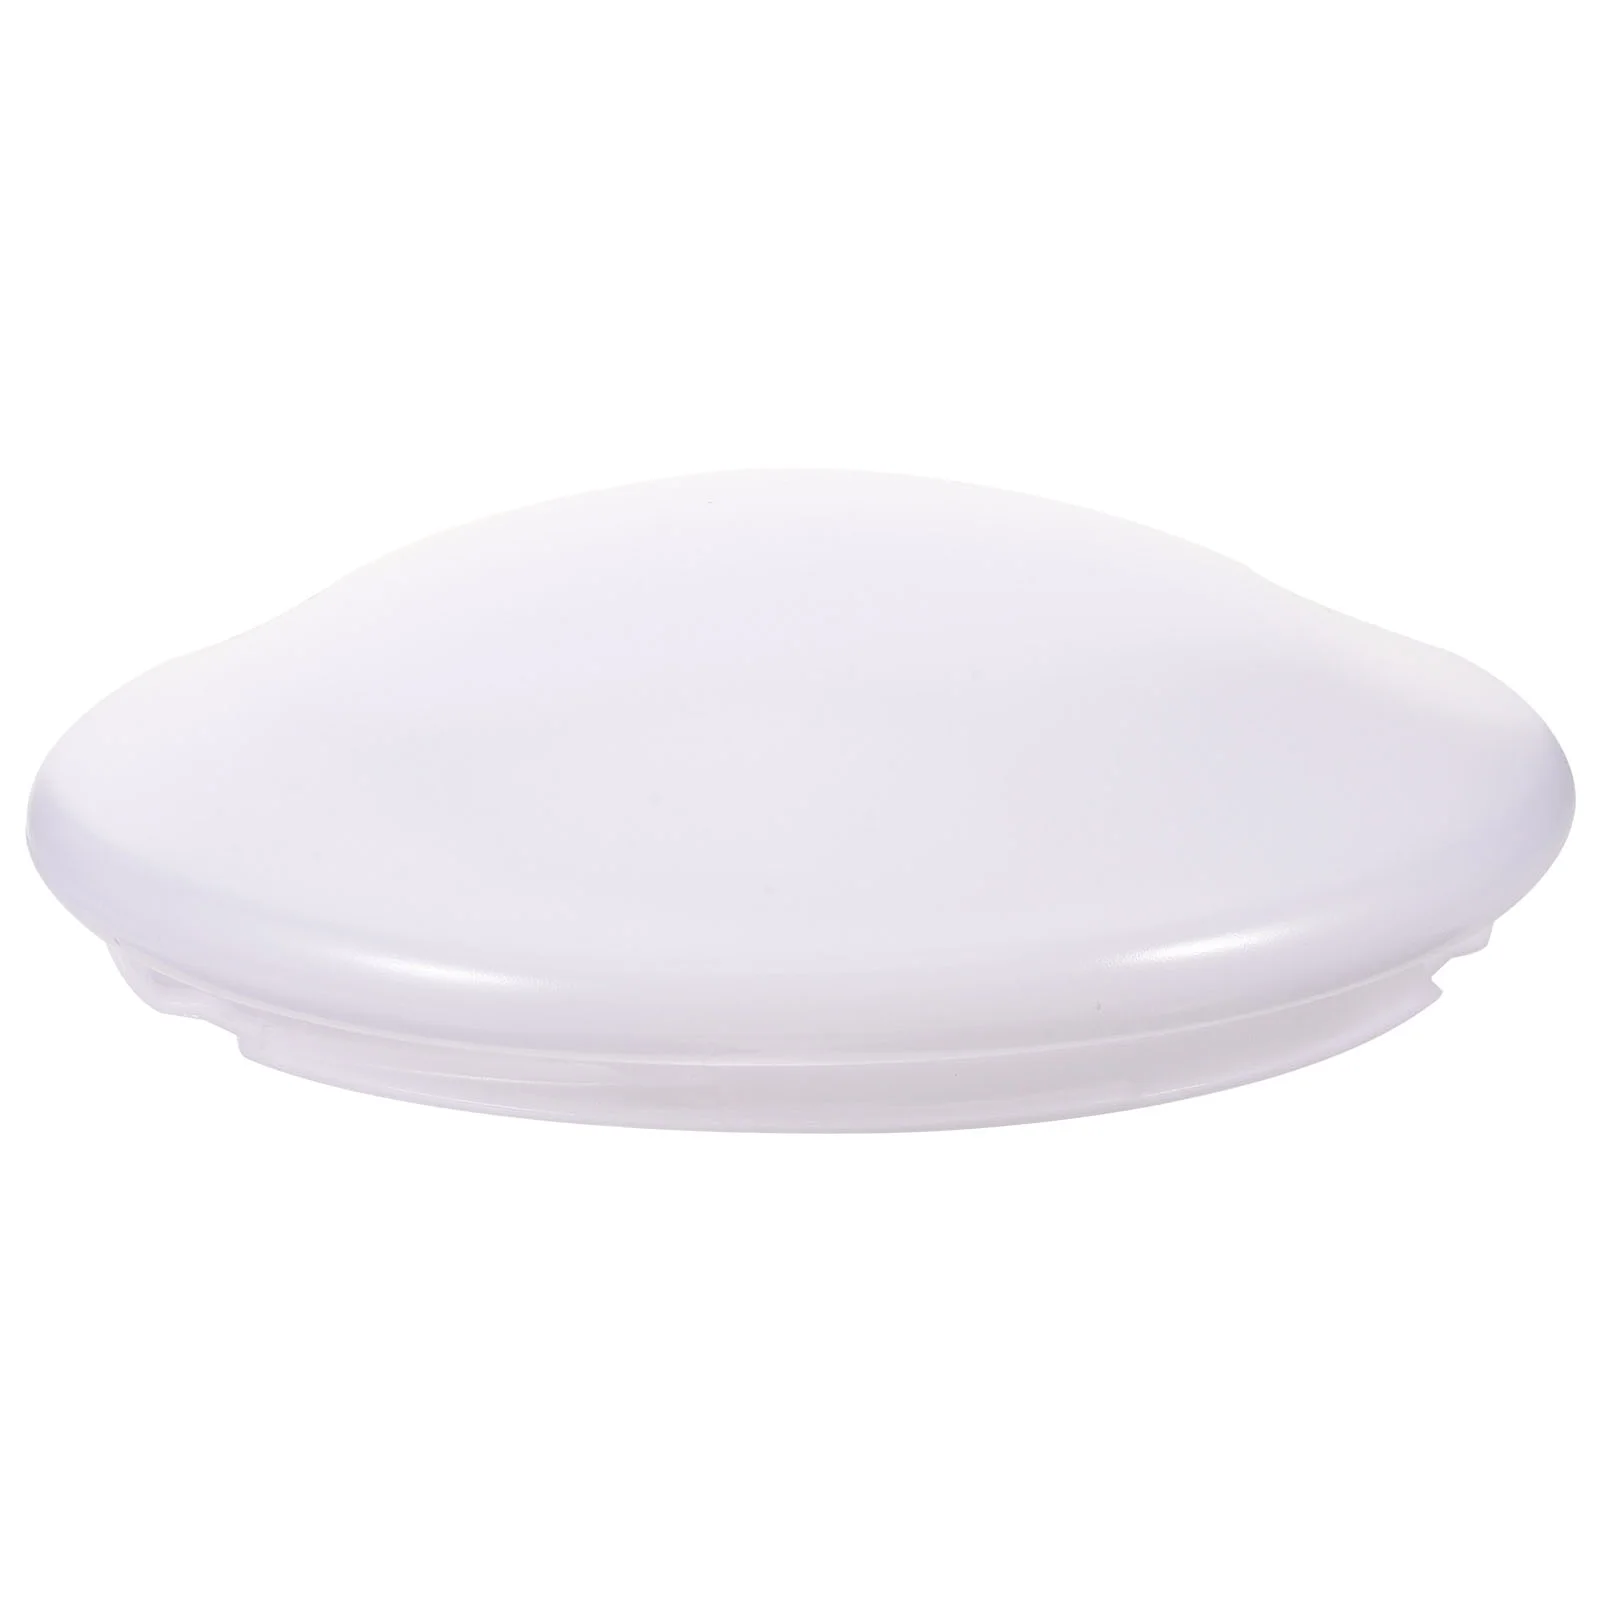 Ceiling Light Shade Plastic Ceiling Plate Cover White Opal Mushroom Glass Shade Ceiling Fixture Hanging Ceiling Lights Shade